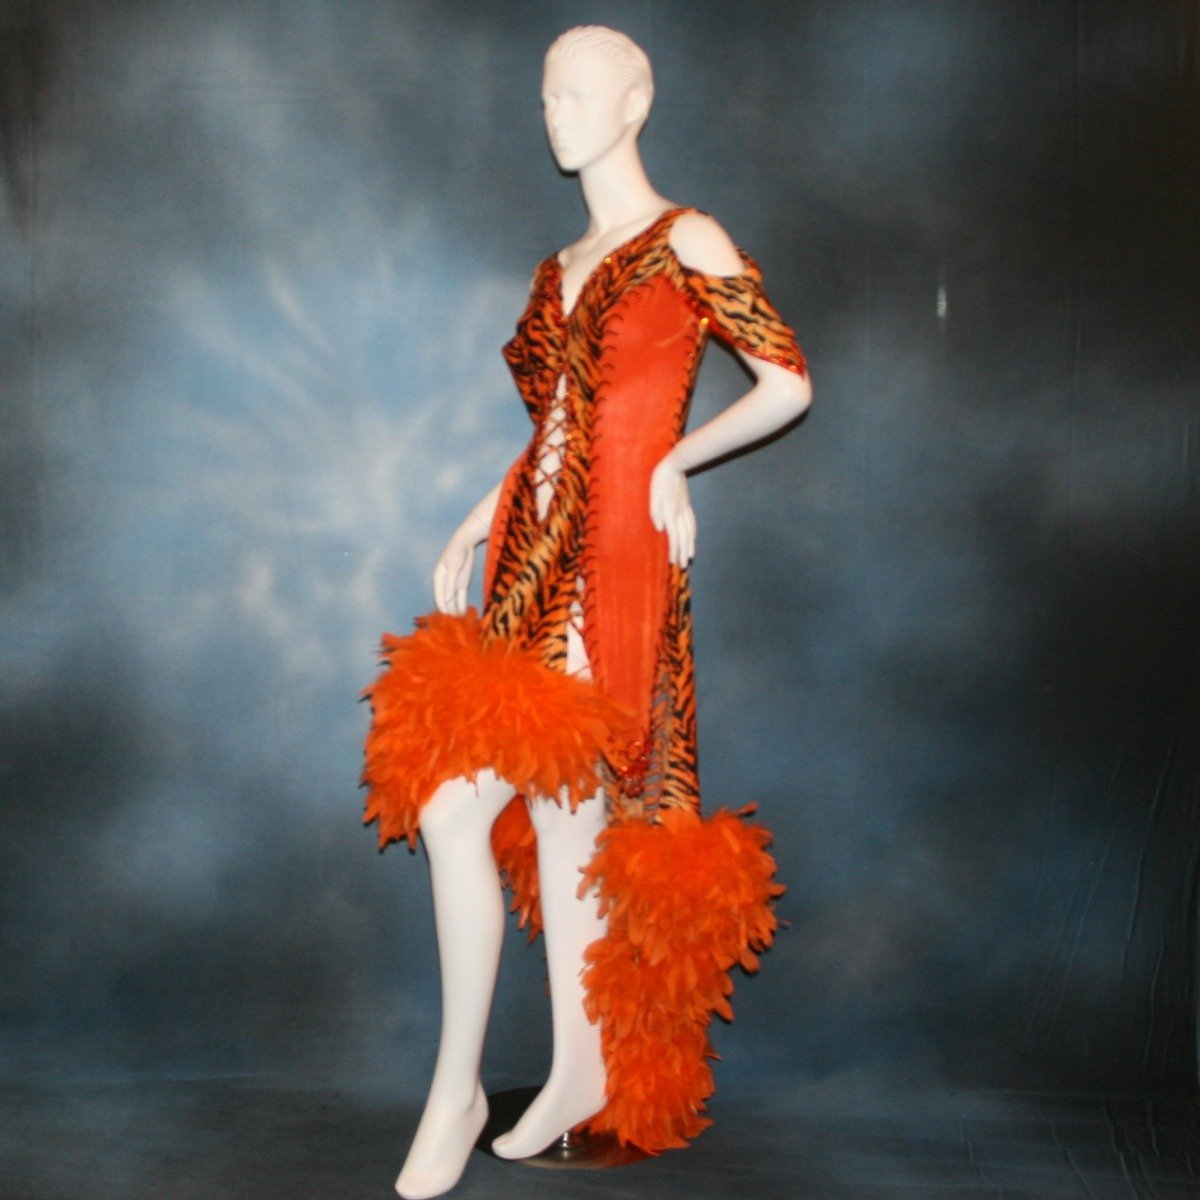 Crystal's Creations side view of Tiger print & orange Latin/rhythm dress created of tiger print lycra & luxurious orange solid slinky has color blocking, lattice work detailing in front bodice, split sides & low back, as well as intriguing longer back skirting, adorned with orange chandelle feathers, also features detailed Swarovski rhinestone work!